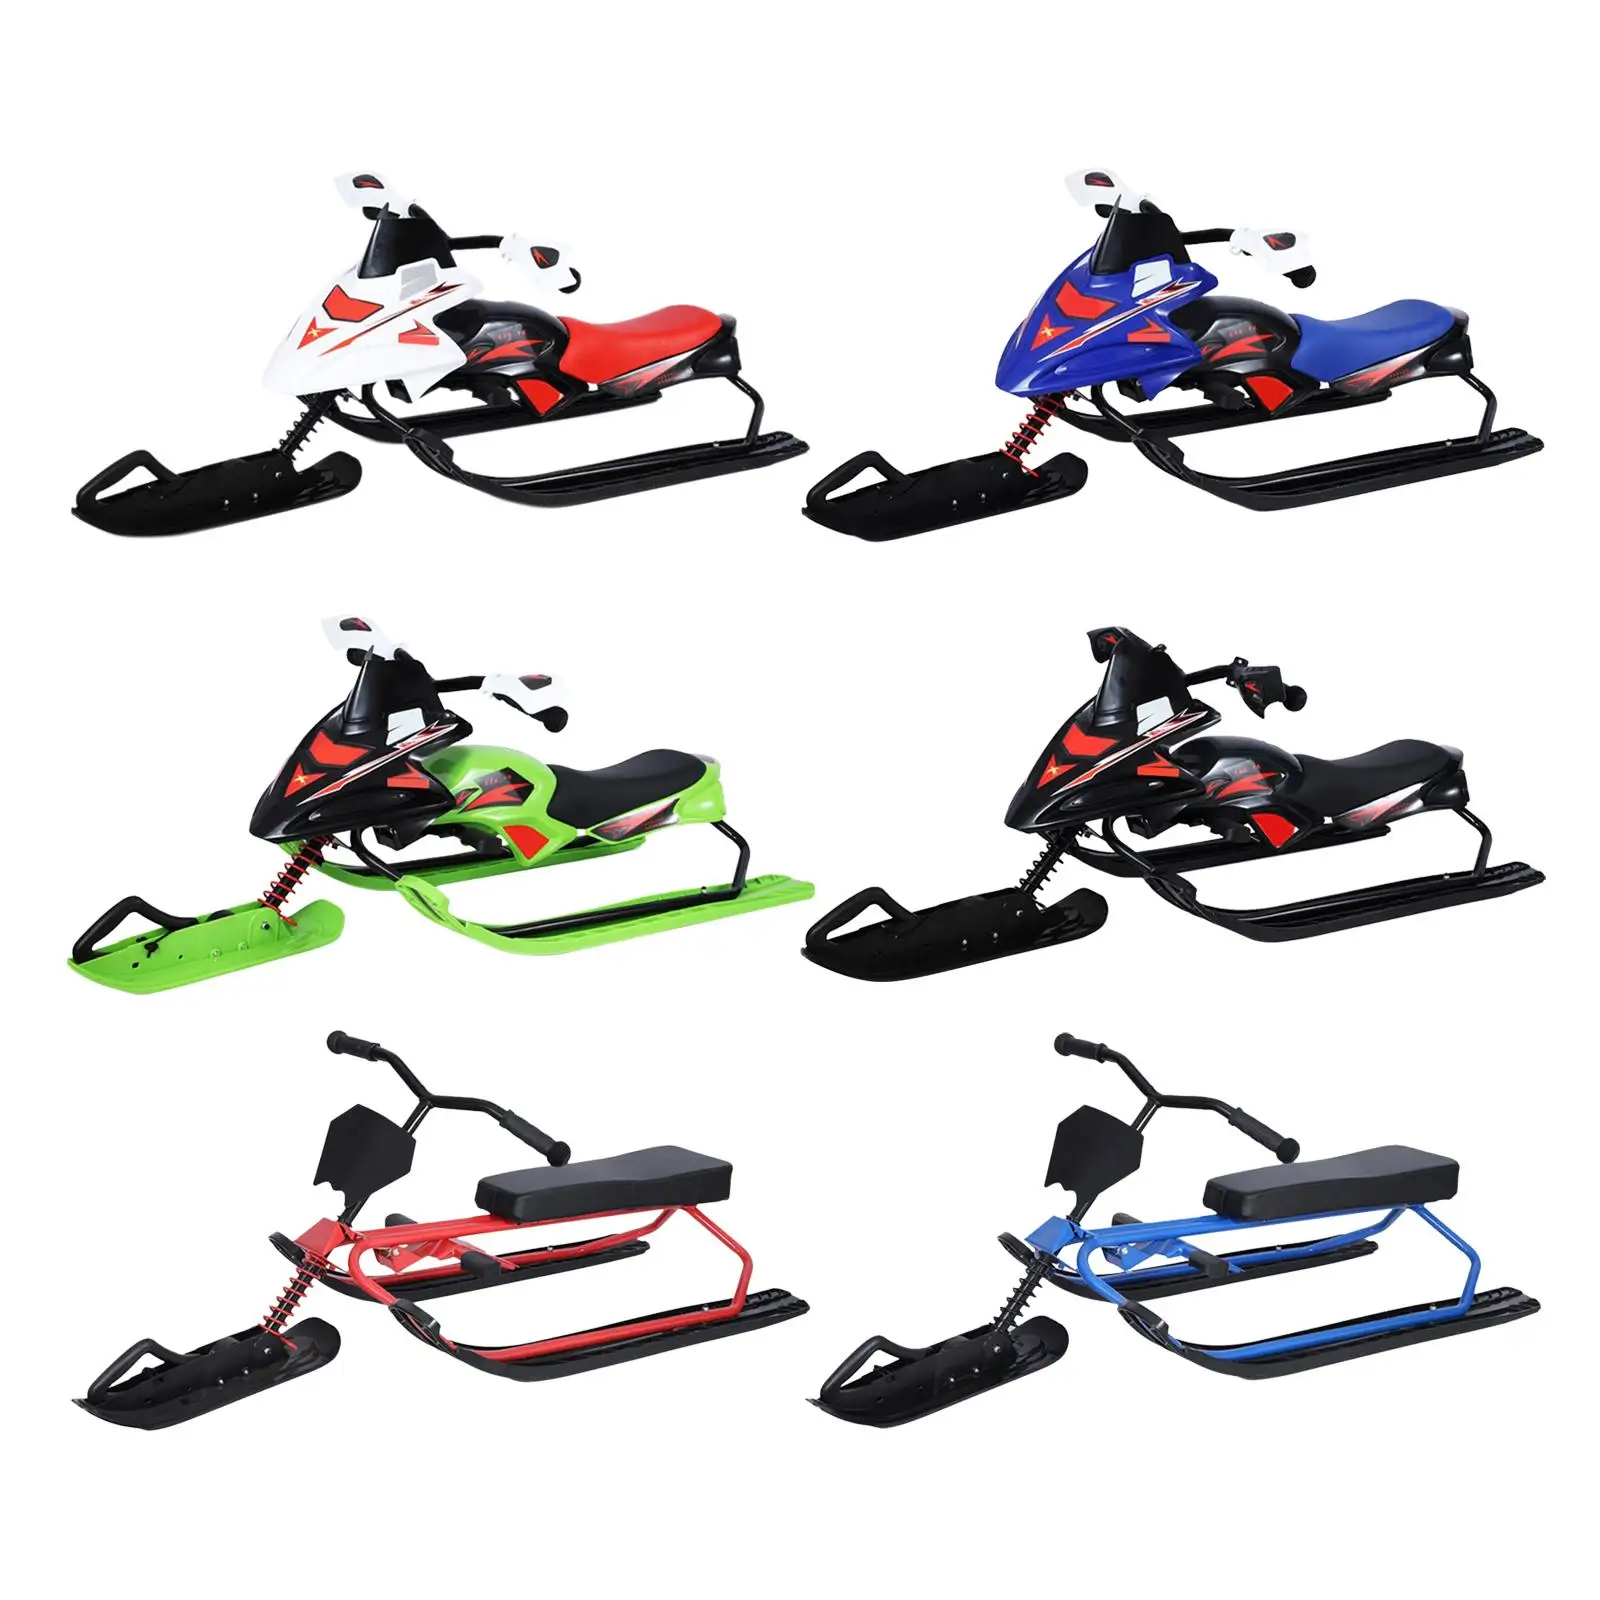 

Snow Racer with Steering Wheel and Twin Breaks Snow Sledge Toboggan Snowboard Ski Sled Slider Board for Outdoor Activities Adult